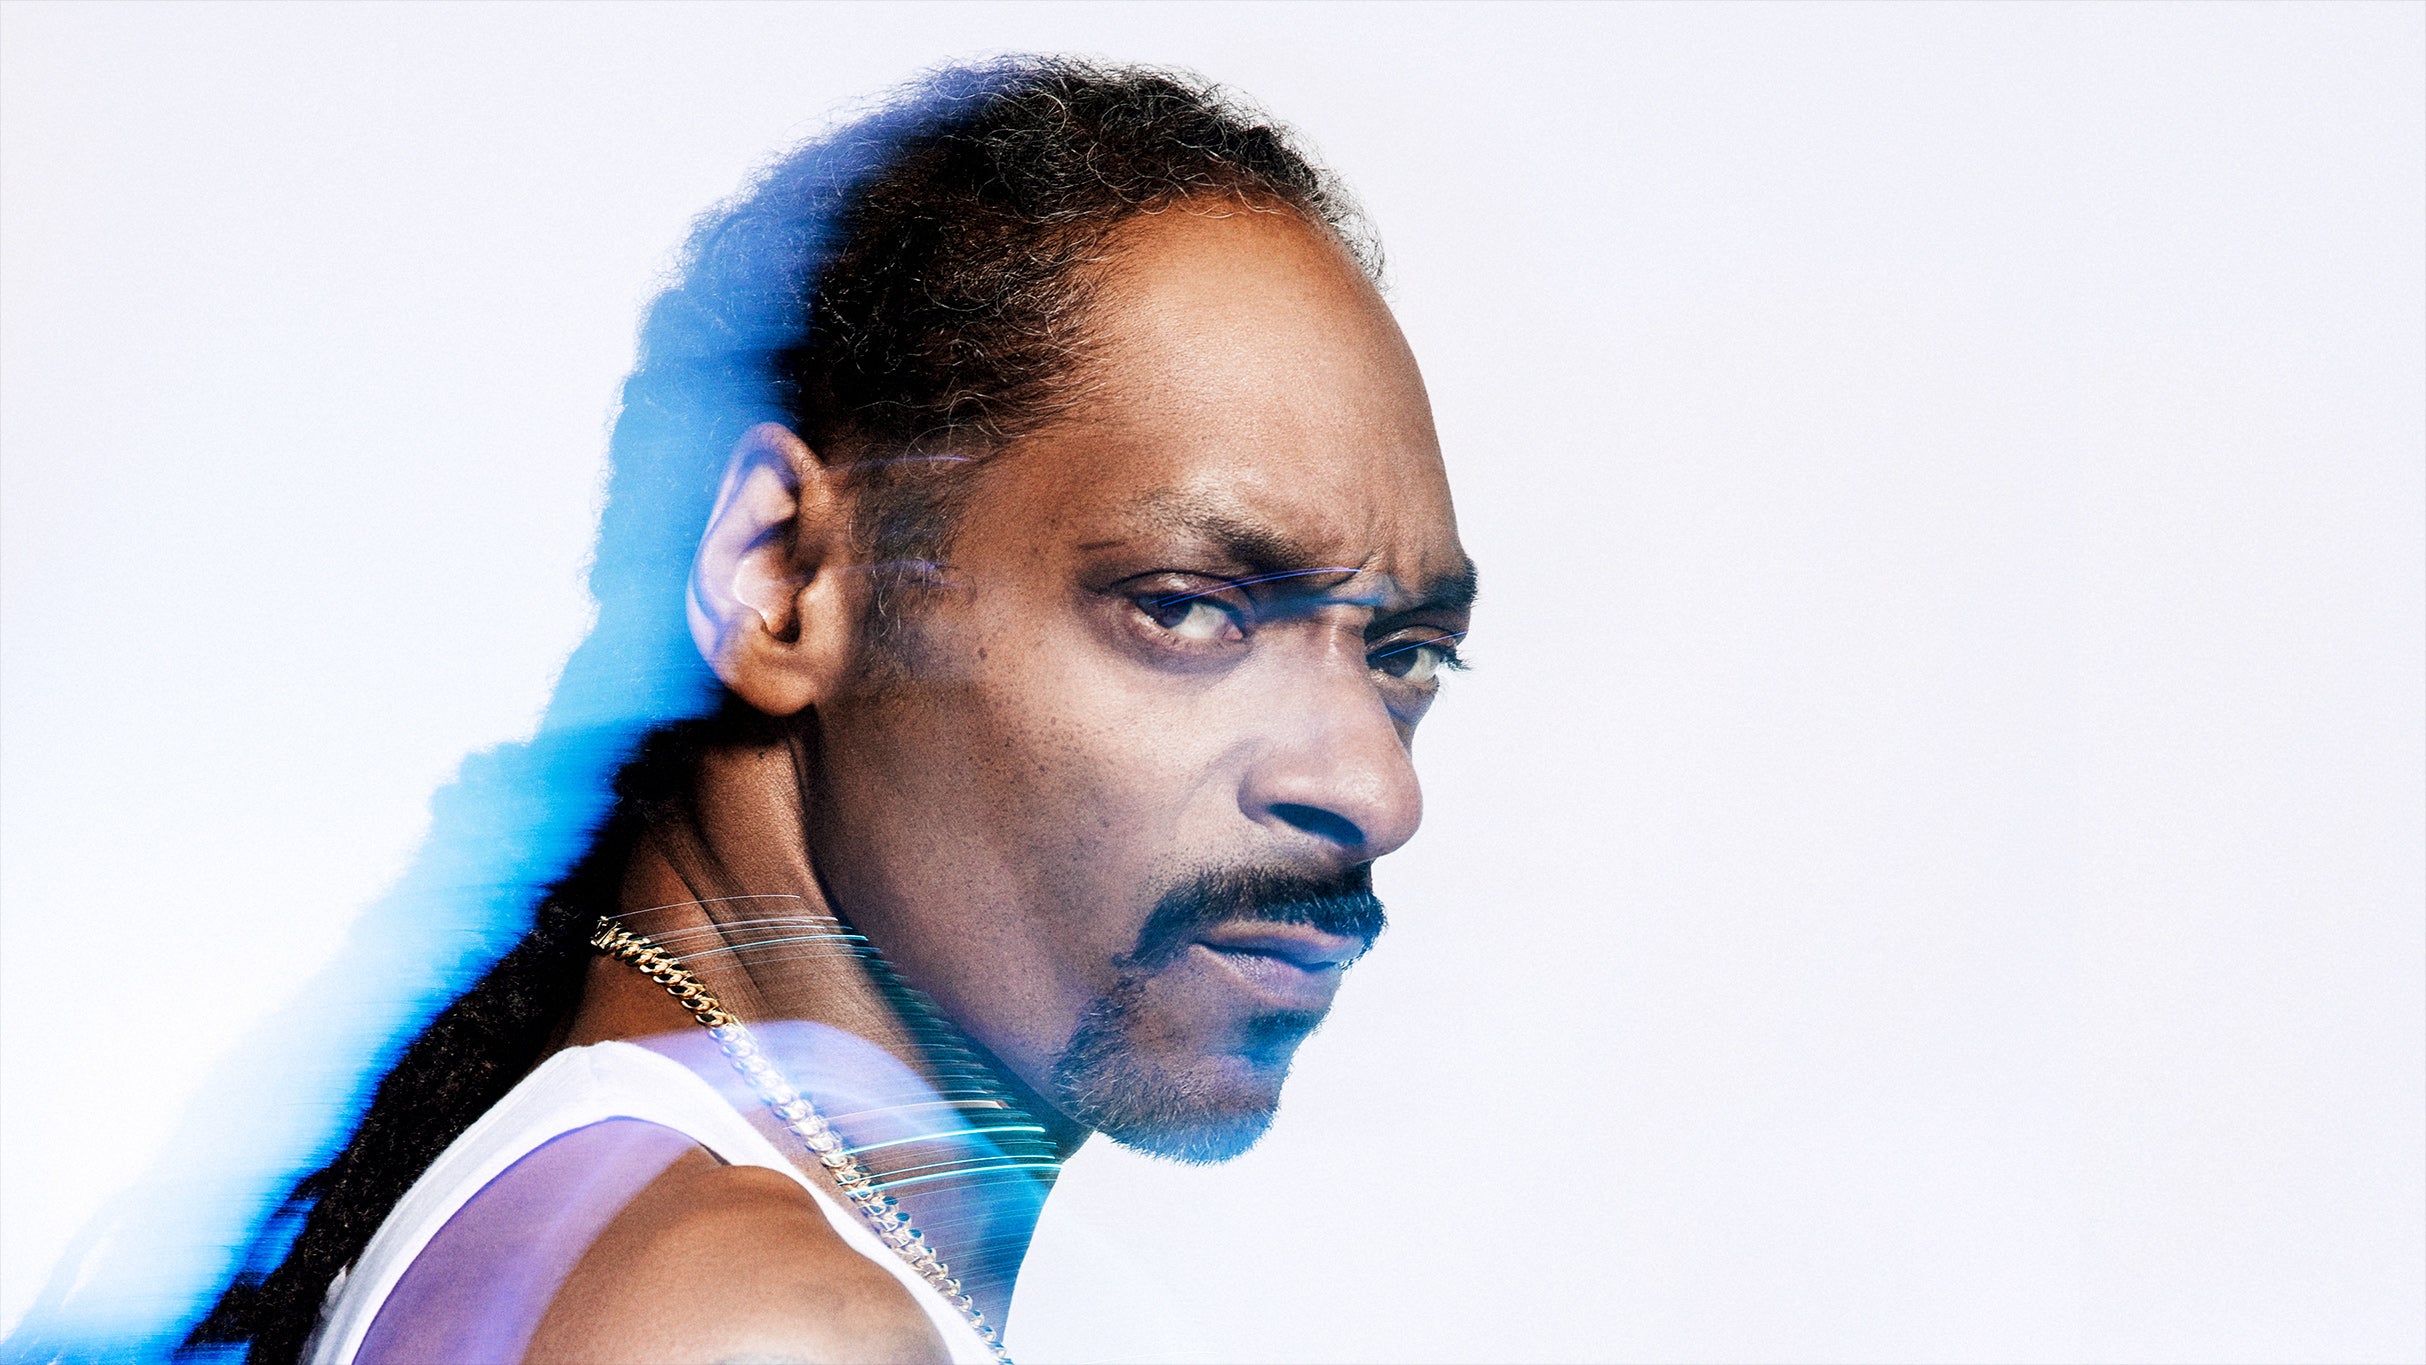 Snoop Dogg - Cali To Canada Tour  presale password for event tickets in Edmonton, AB (Rogers Place)